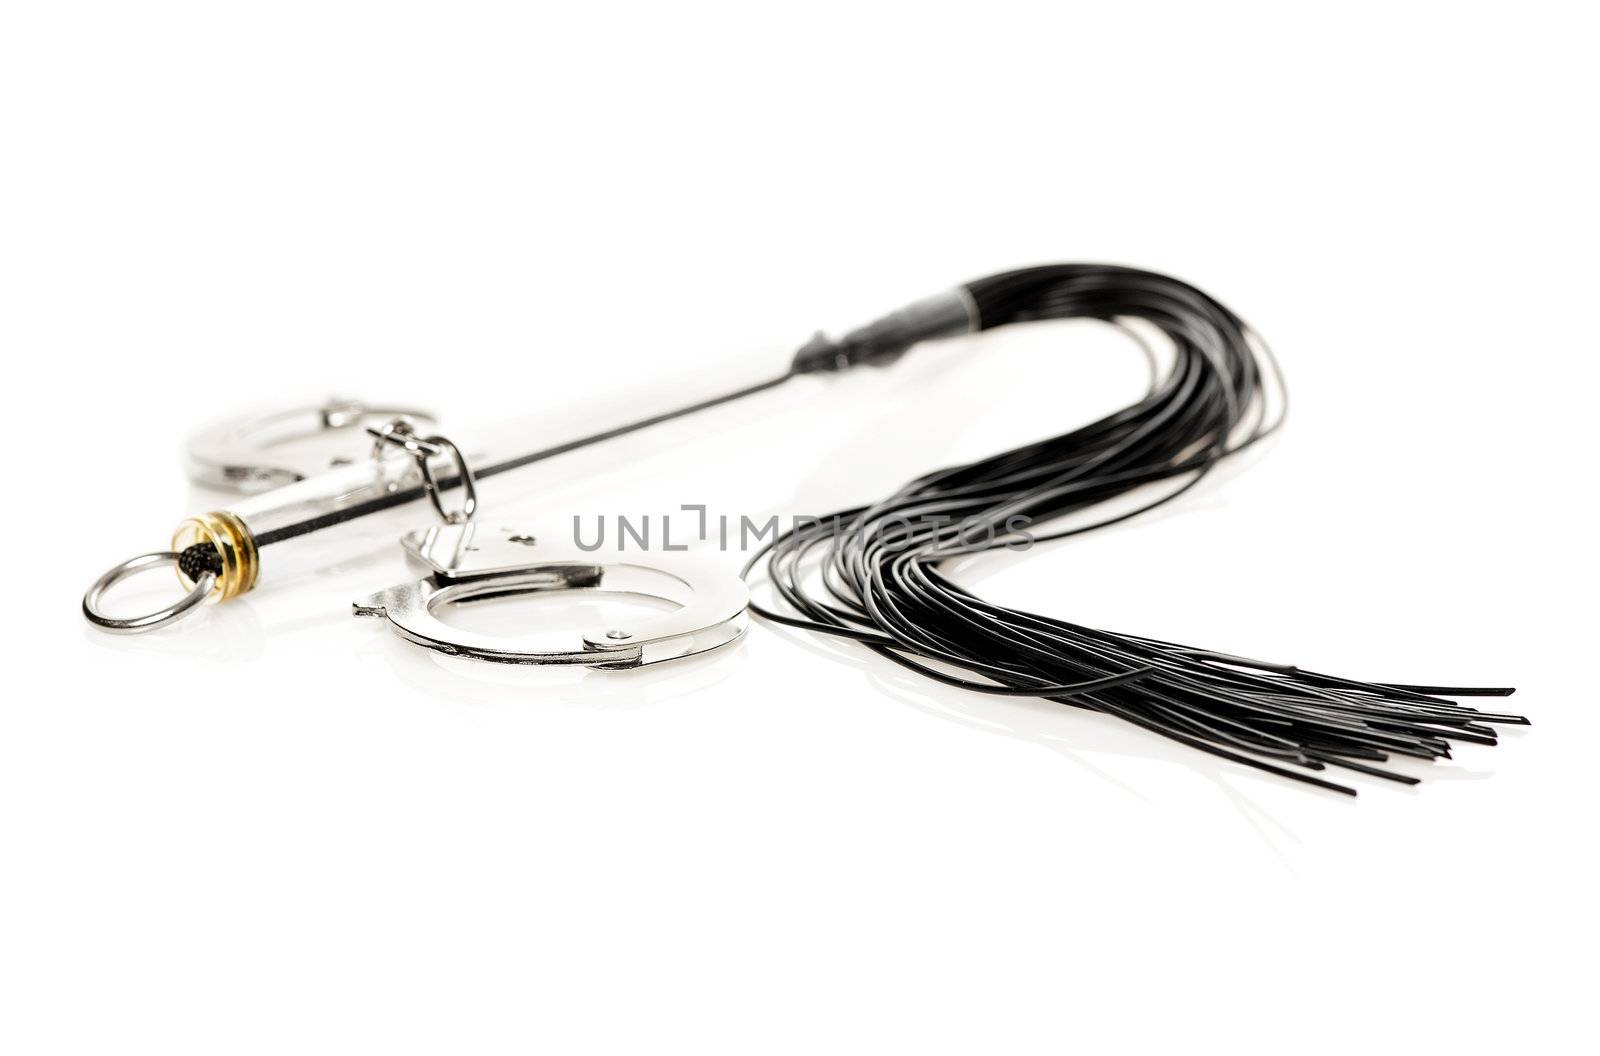 A whip and hand cuffs for fetish/bdsm games isolated on white. 